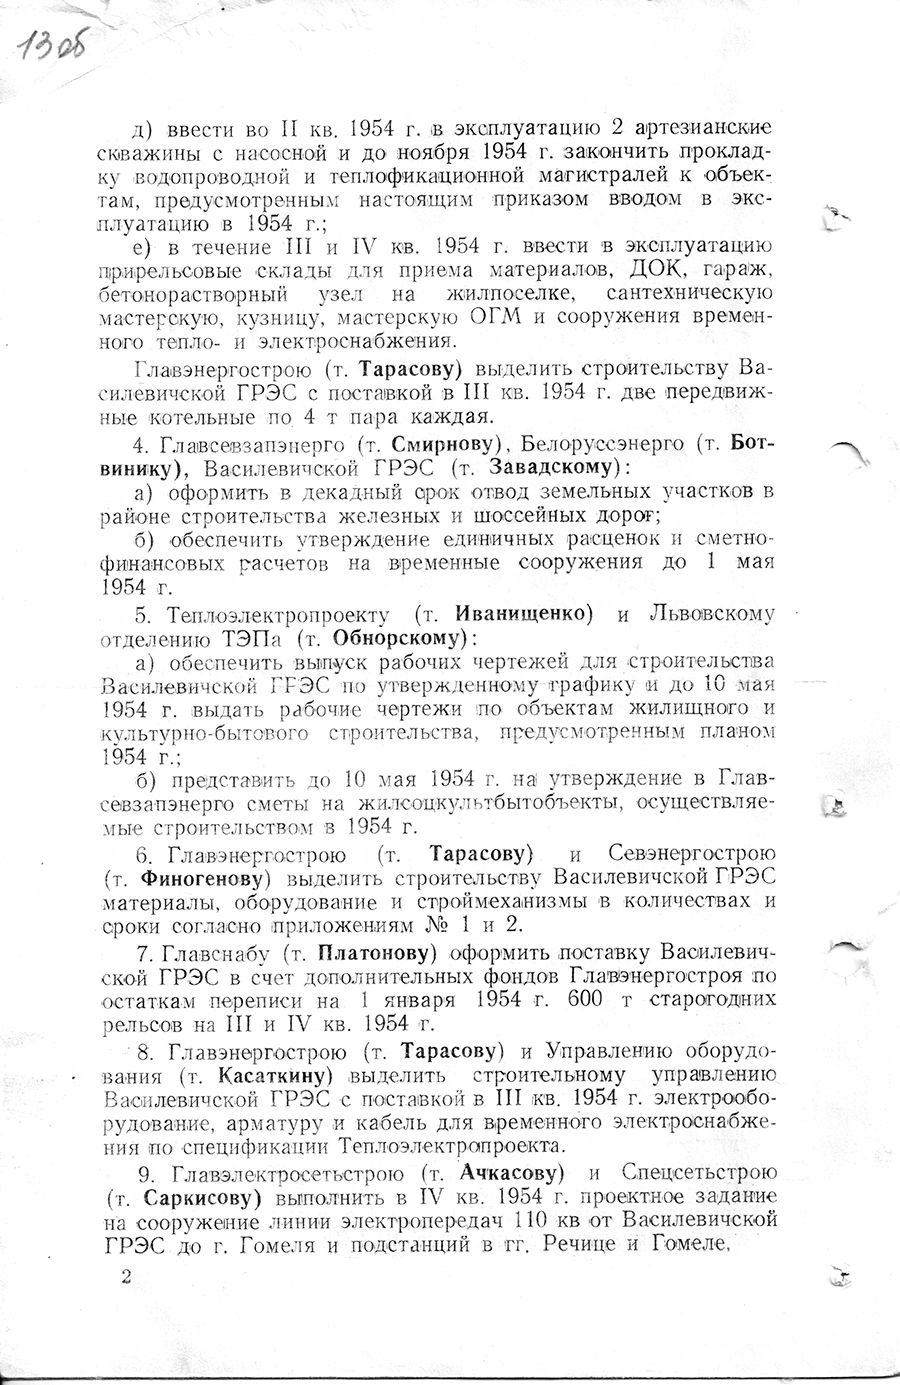 Order No. 206/A of the Ministry of Power Plants and Electric Medications of the USSR on the forcing of the construction of the Vasilevichi State District Power Plant-с. 1